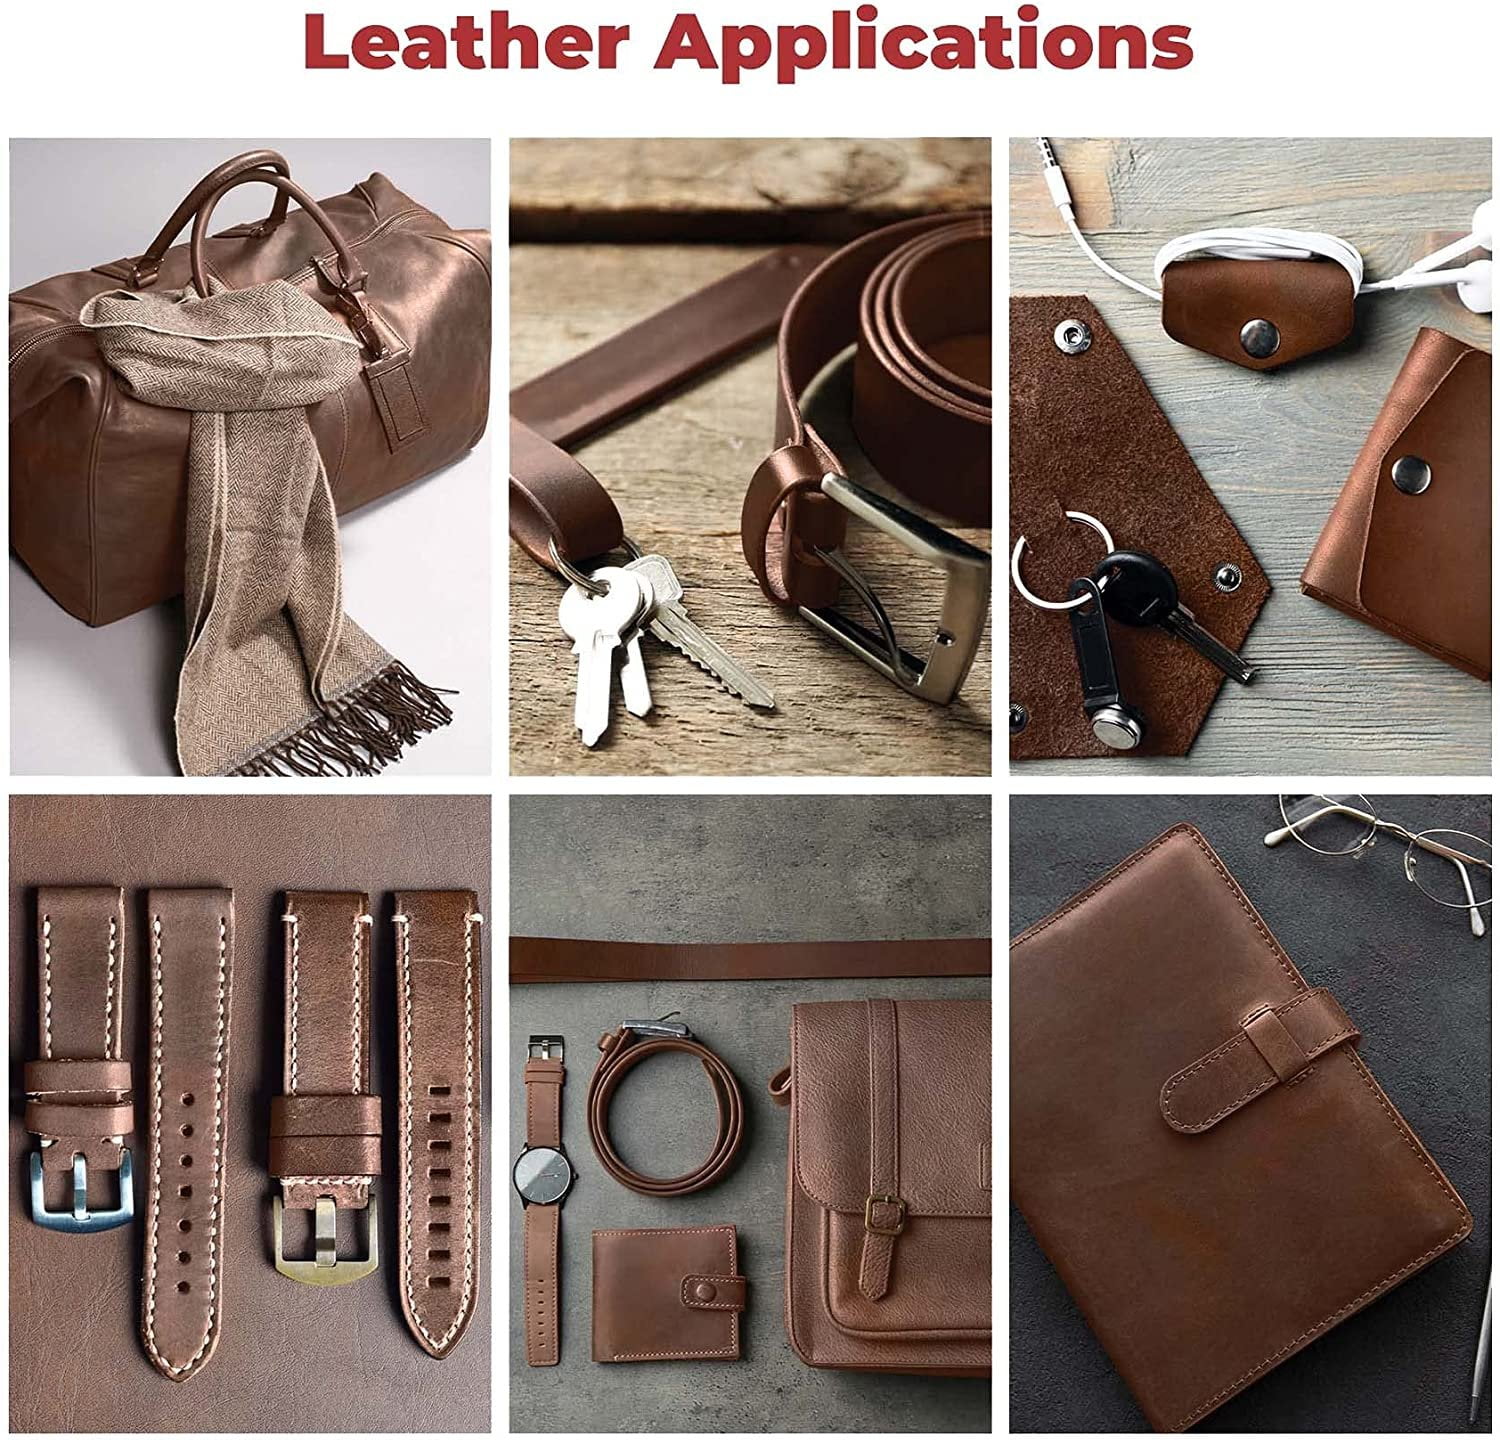 European Leather Work 9-10 oz. (3.6-4mm) Oil-Tanned Leather Scraps Bourbon  Brown - Helia Beer Co